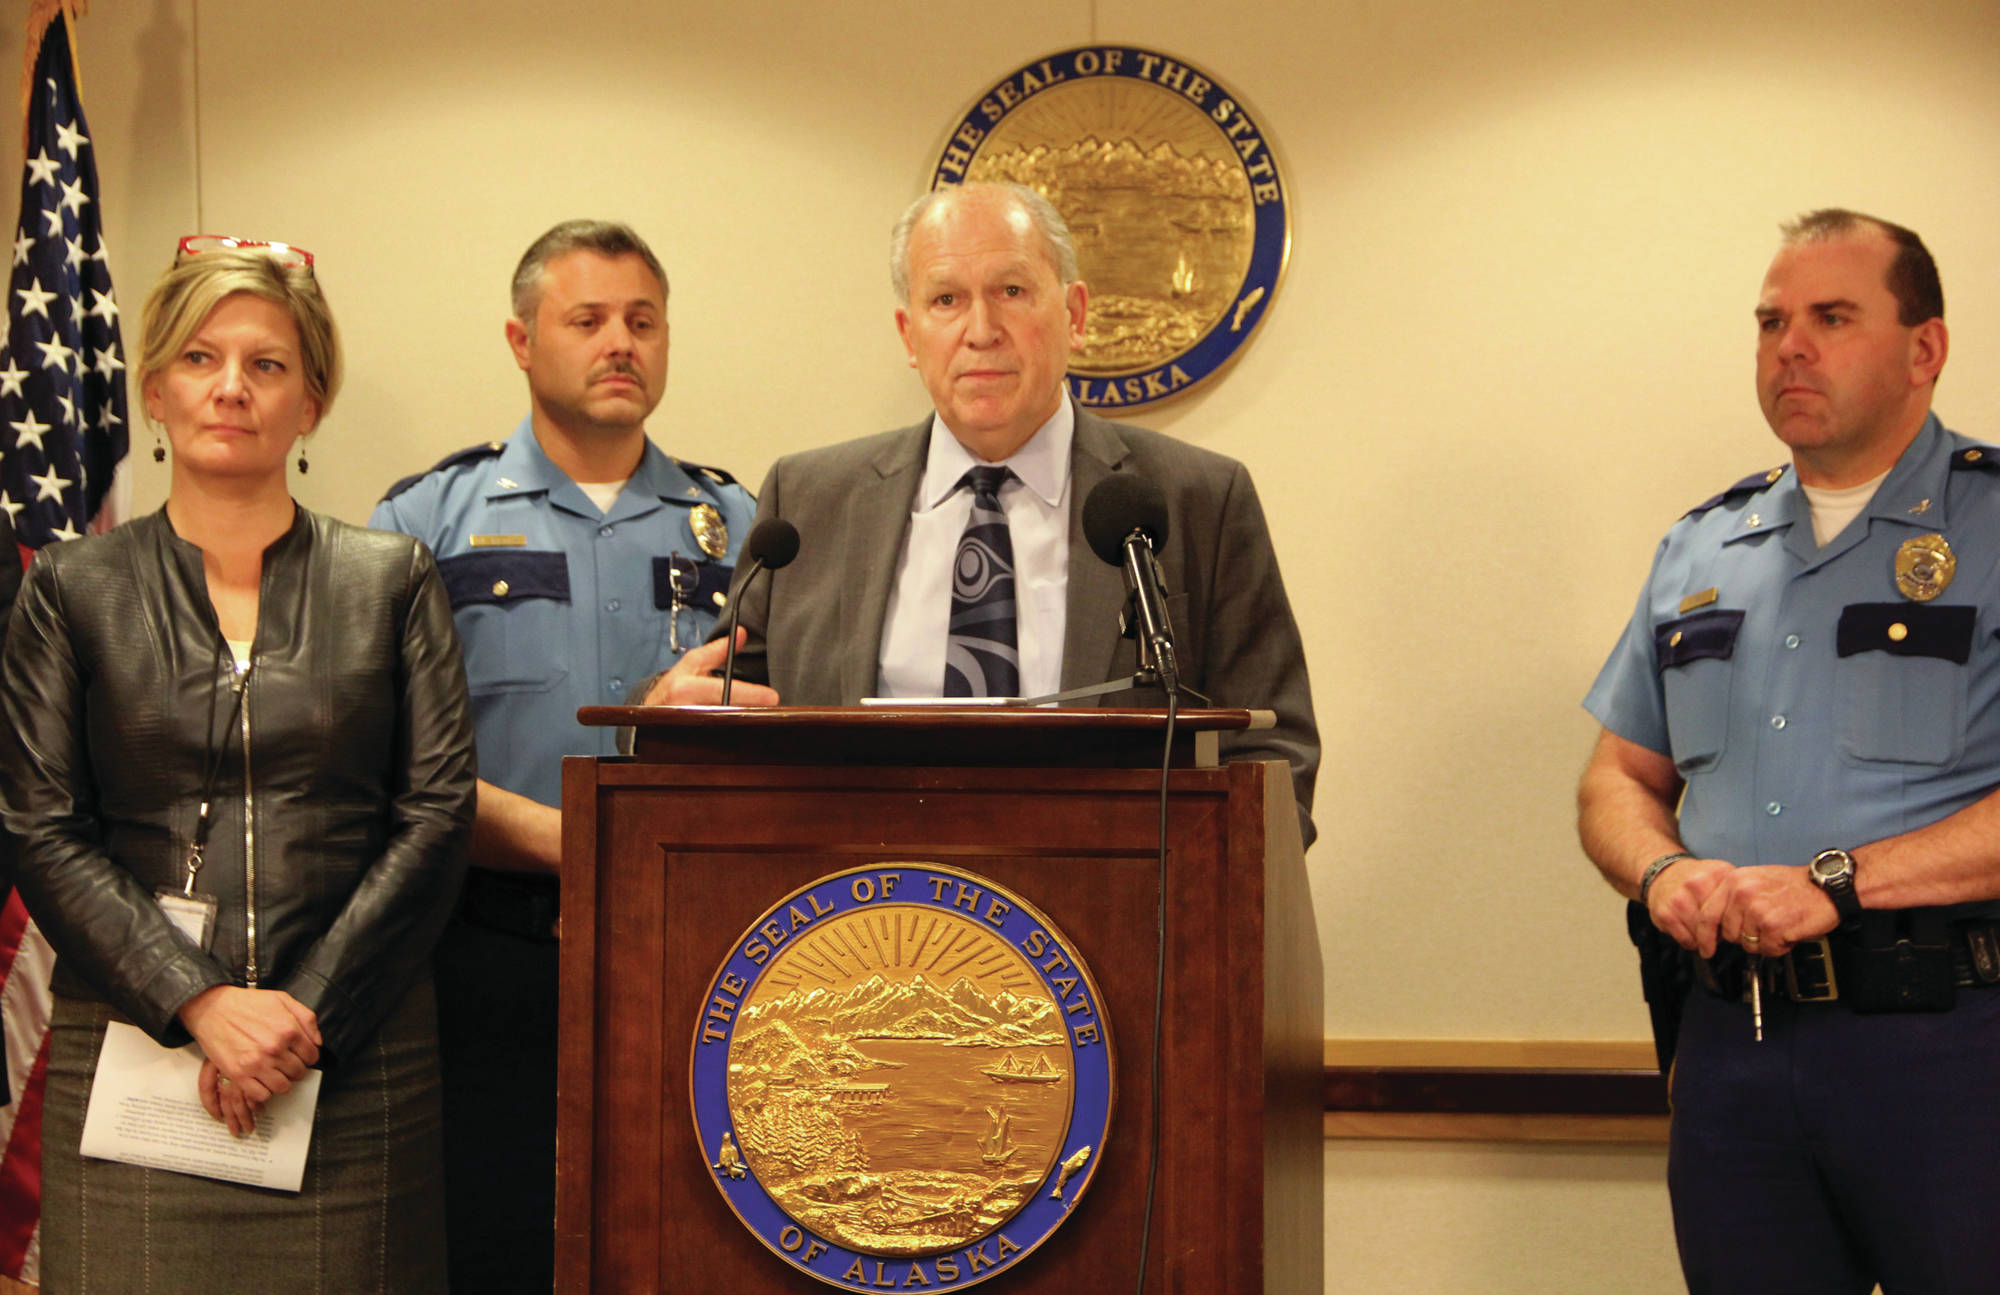 Gov. Bill Walker speaks to reporters during a Friday press conference in Anchorage. At left are Attorney General Jahna Lindemuth and Col. Hans Brinke, director of the Alaska State Troopers. To the right is Col. Steve Hall, director of Wildlife Troopers. (Alaska Journal of Commerce Photo)